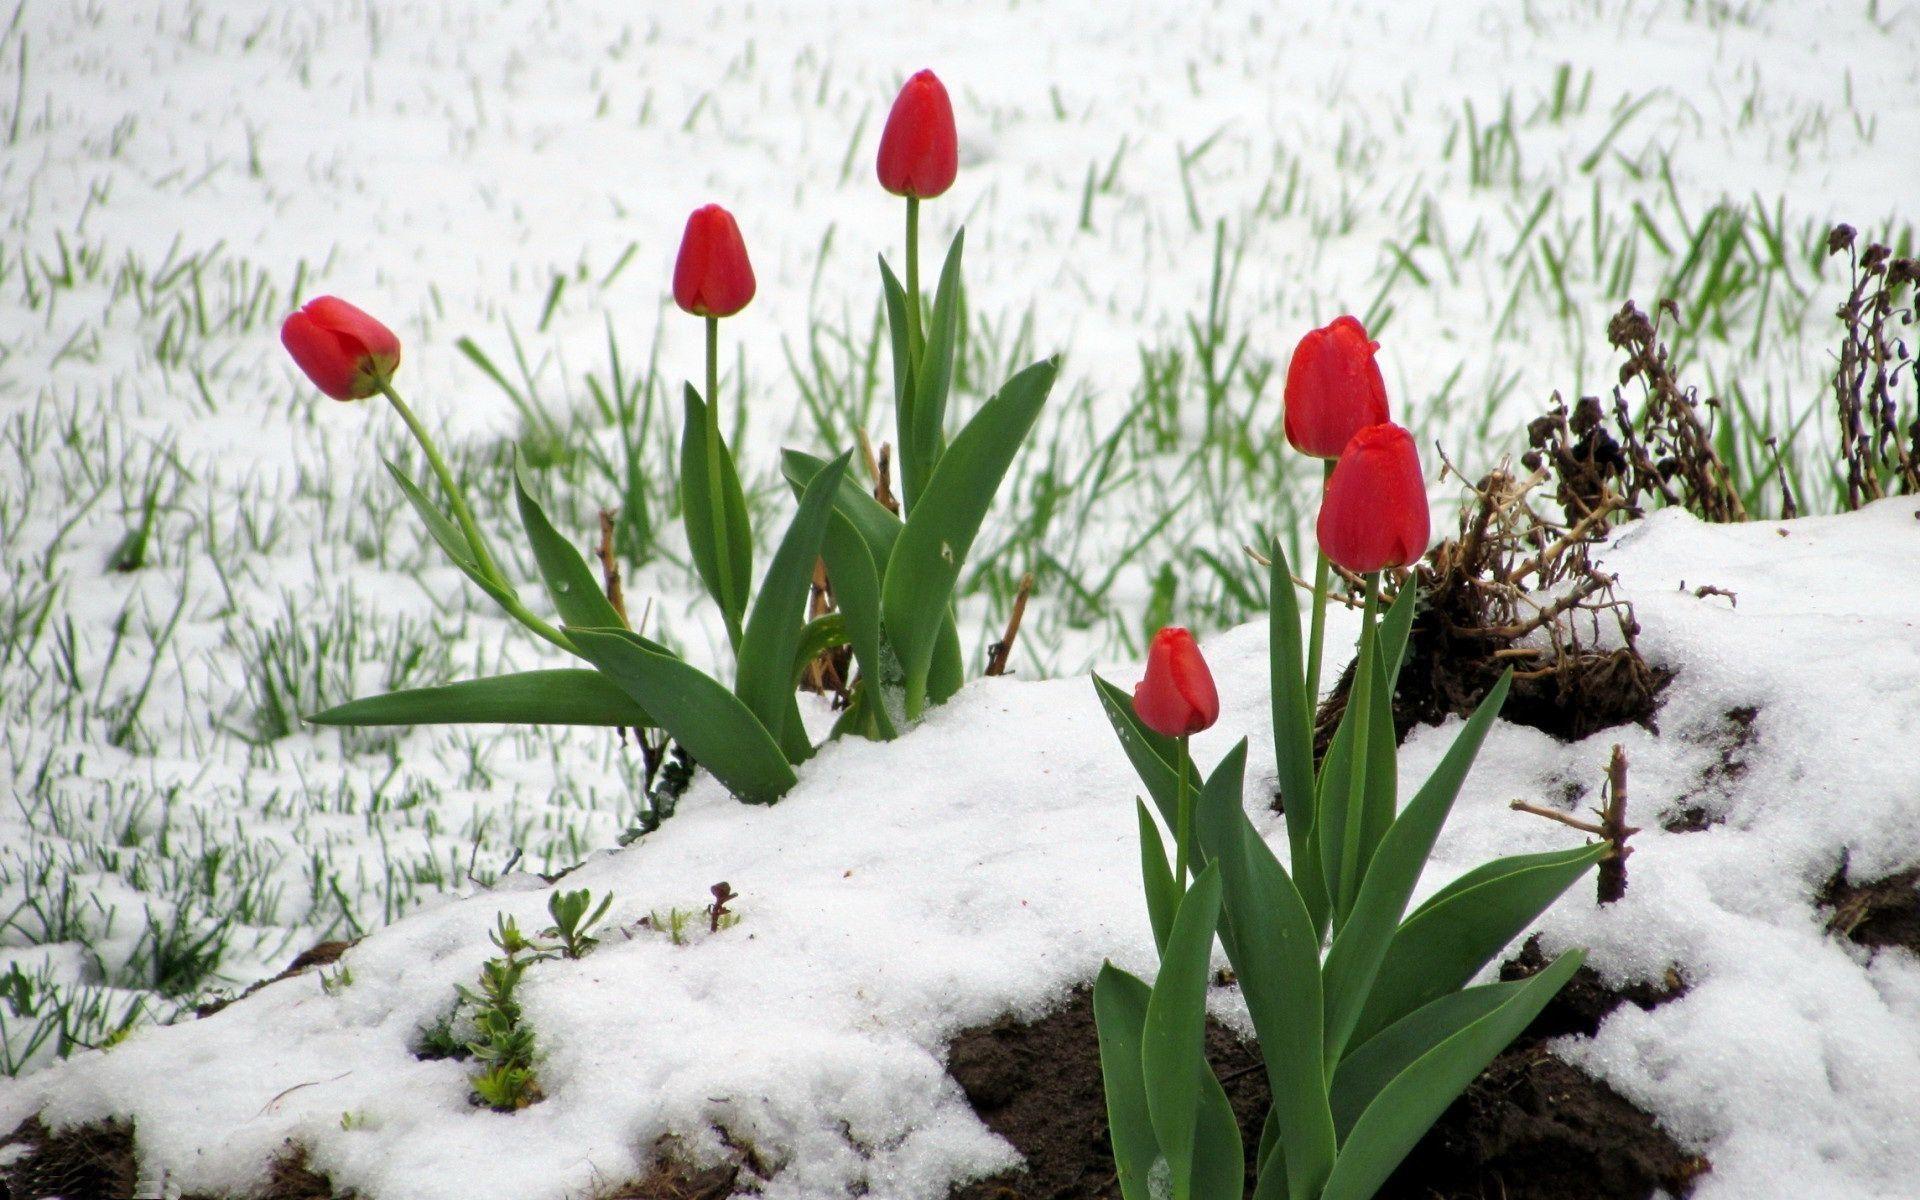 Flowers in Snow Wallpaper Free Flowers in Snow Background